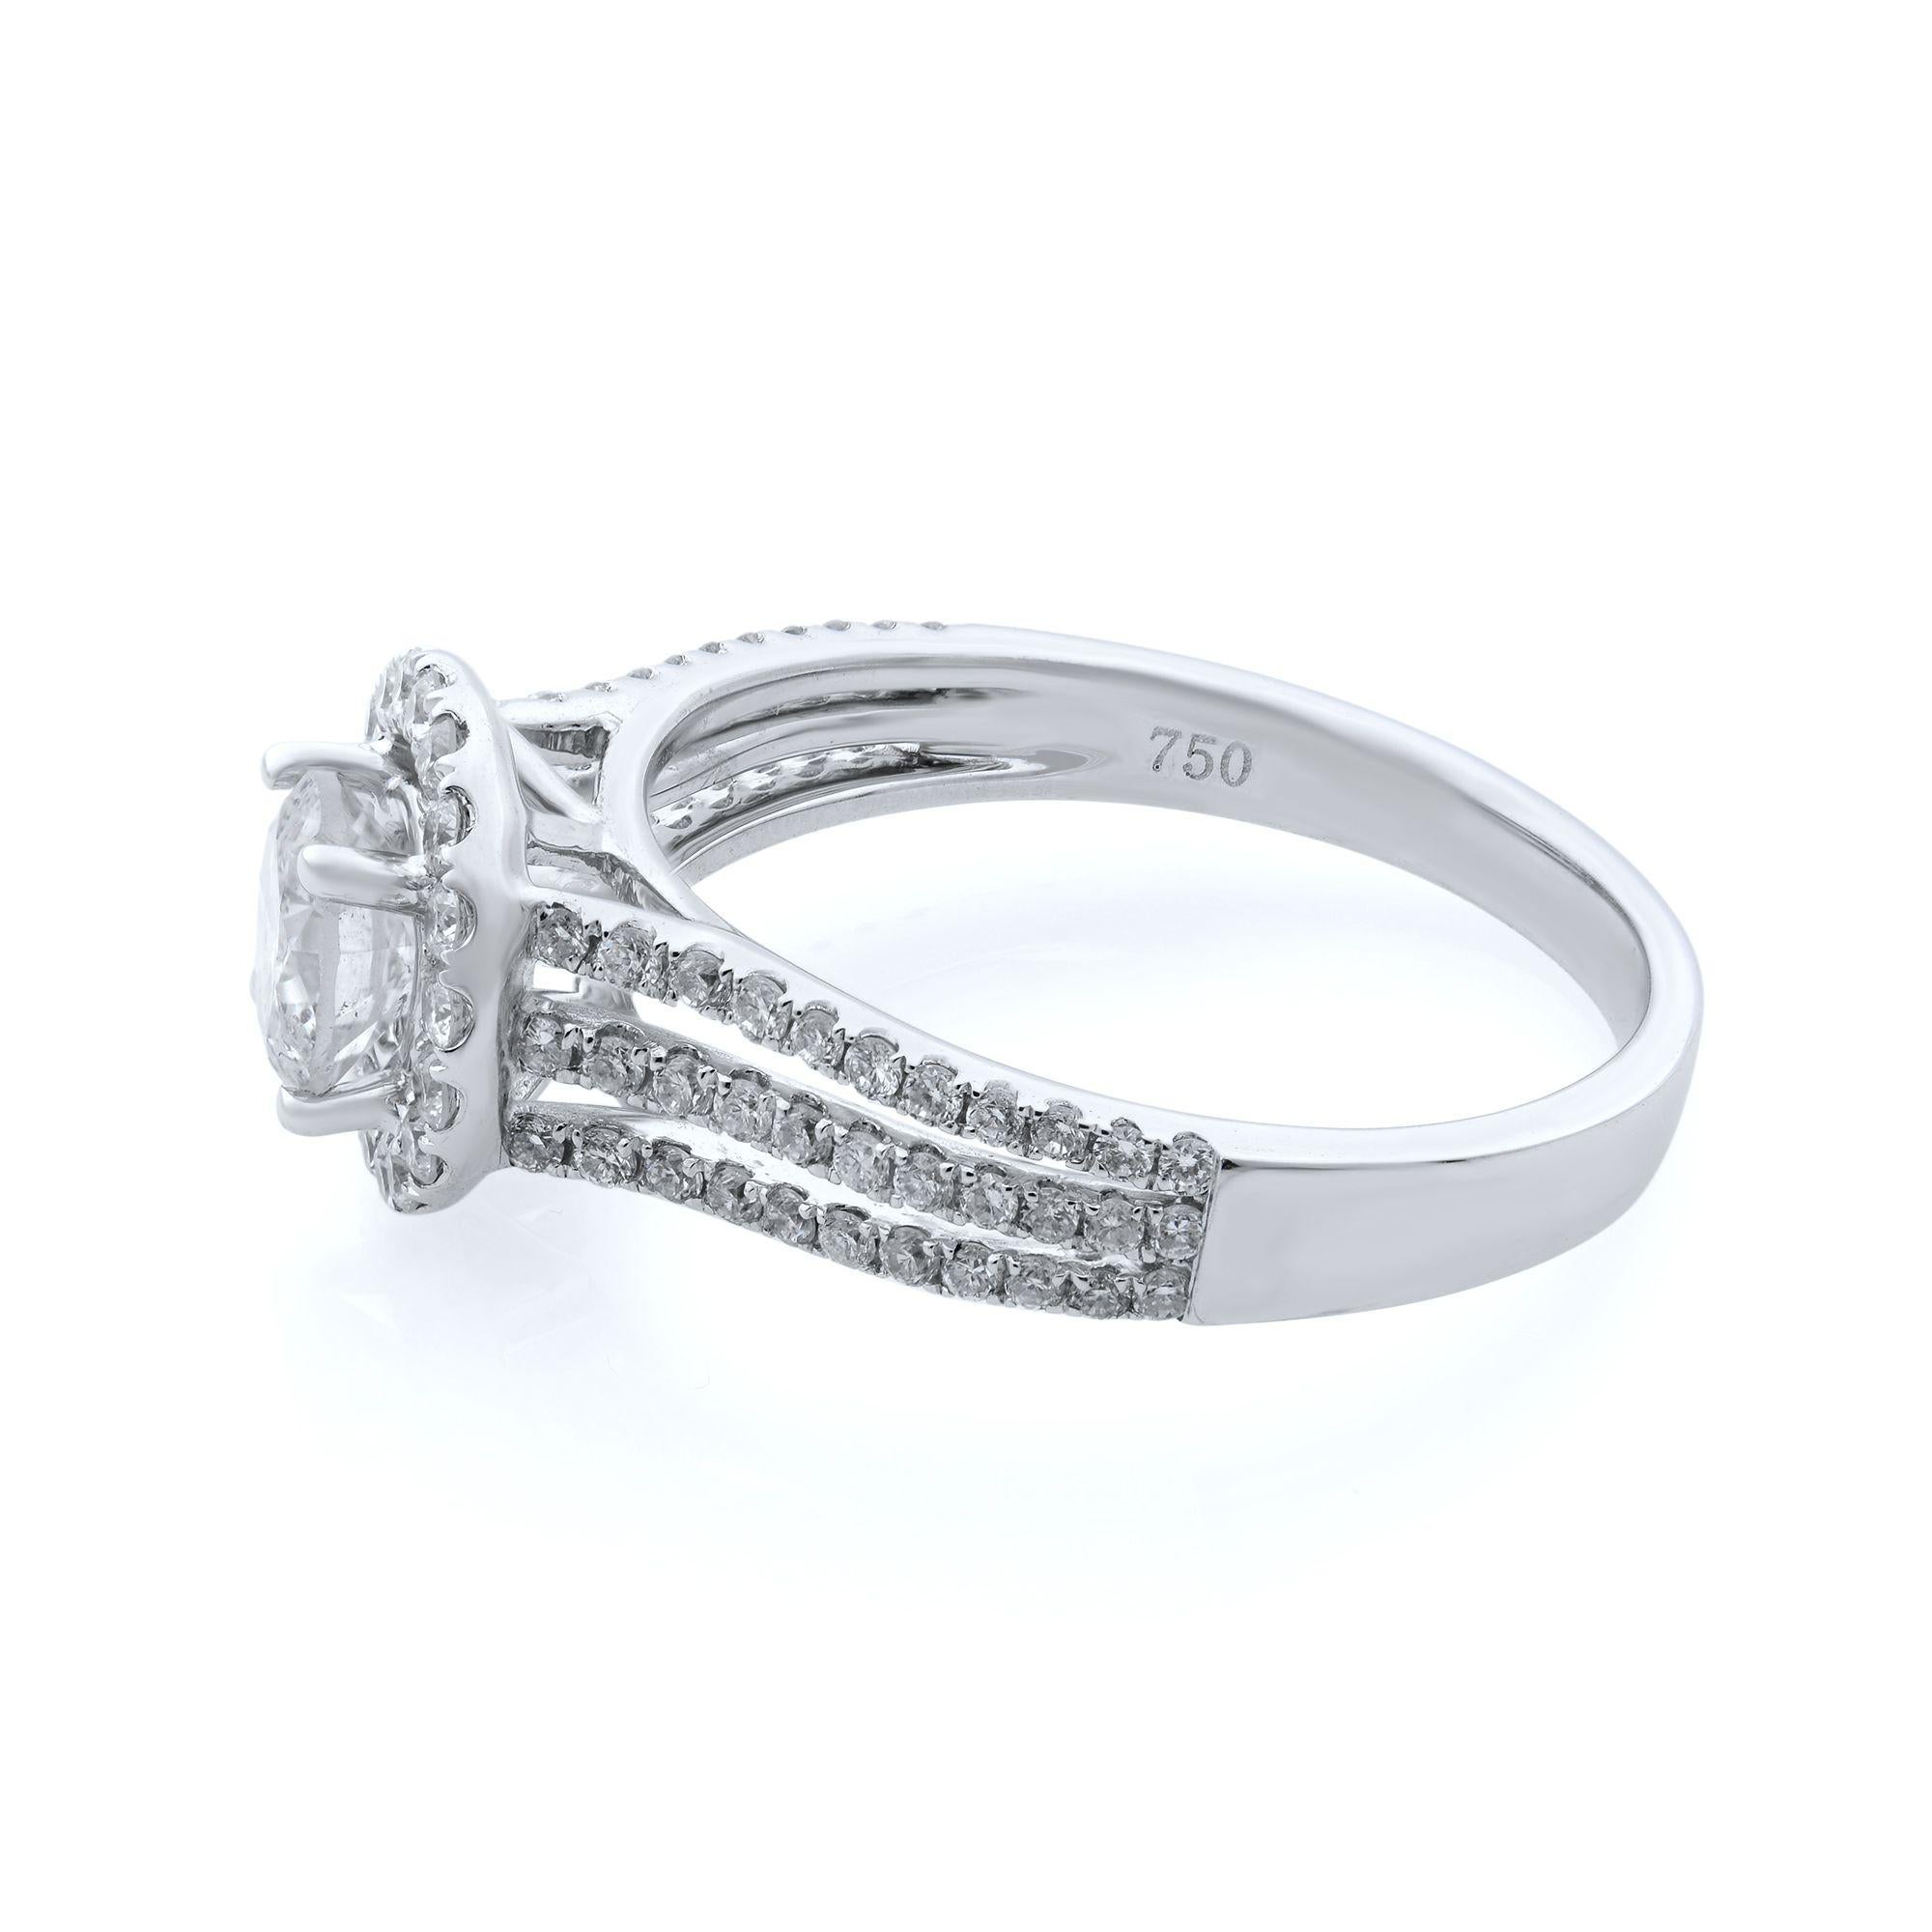 14k White Gold 0.60 carat round cut diamond three row split shank halo engagement ring. Split shank divided into three rows, each pave set with brilliant white diamonds, hoists up the center mounting surrounded by a halo of radiant tiny diamonds.